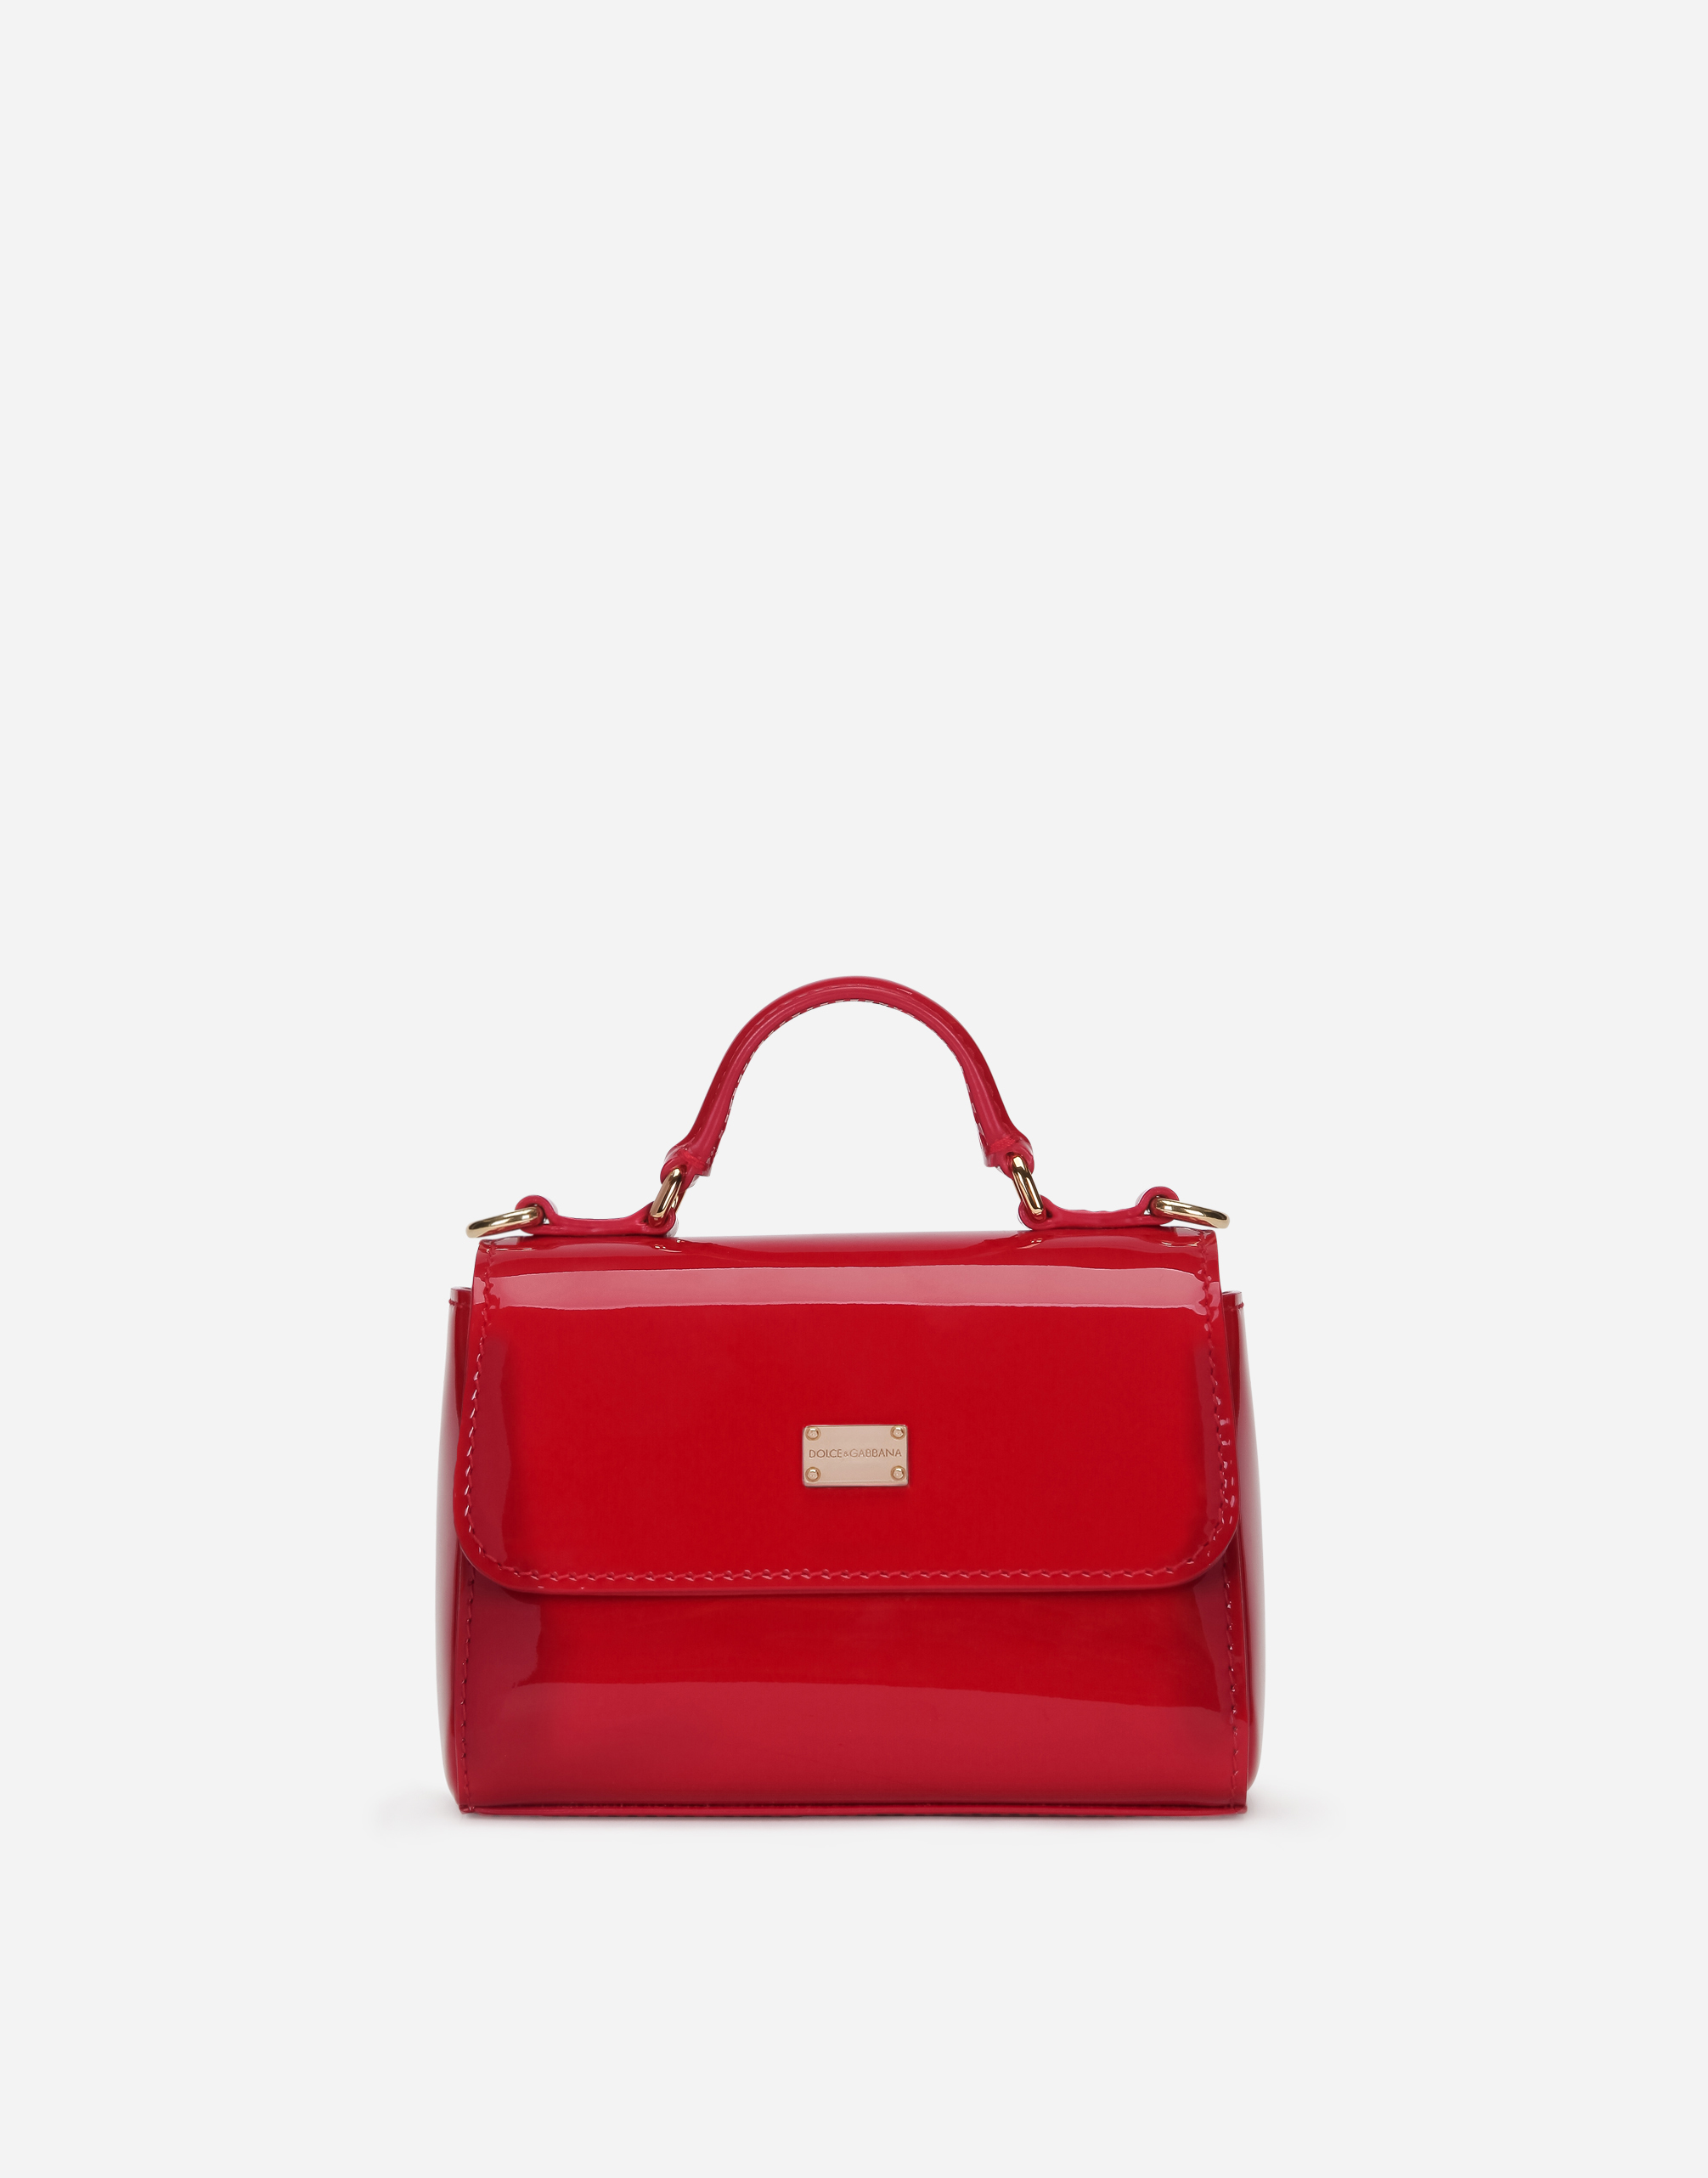 PATENT LEATHER HANDBAG WITH SHOULDER STRAP in Red